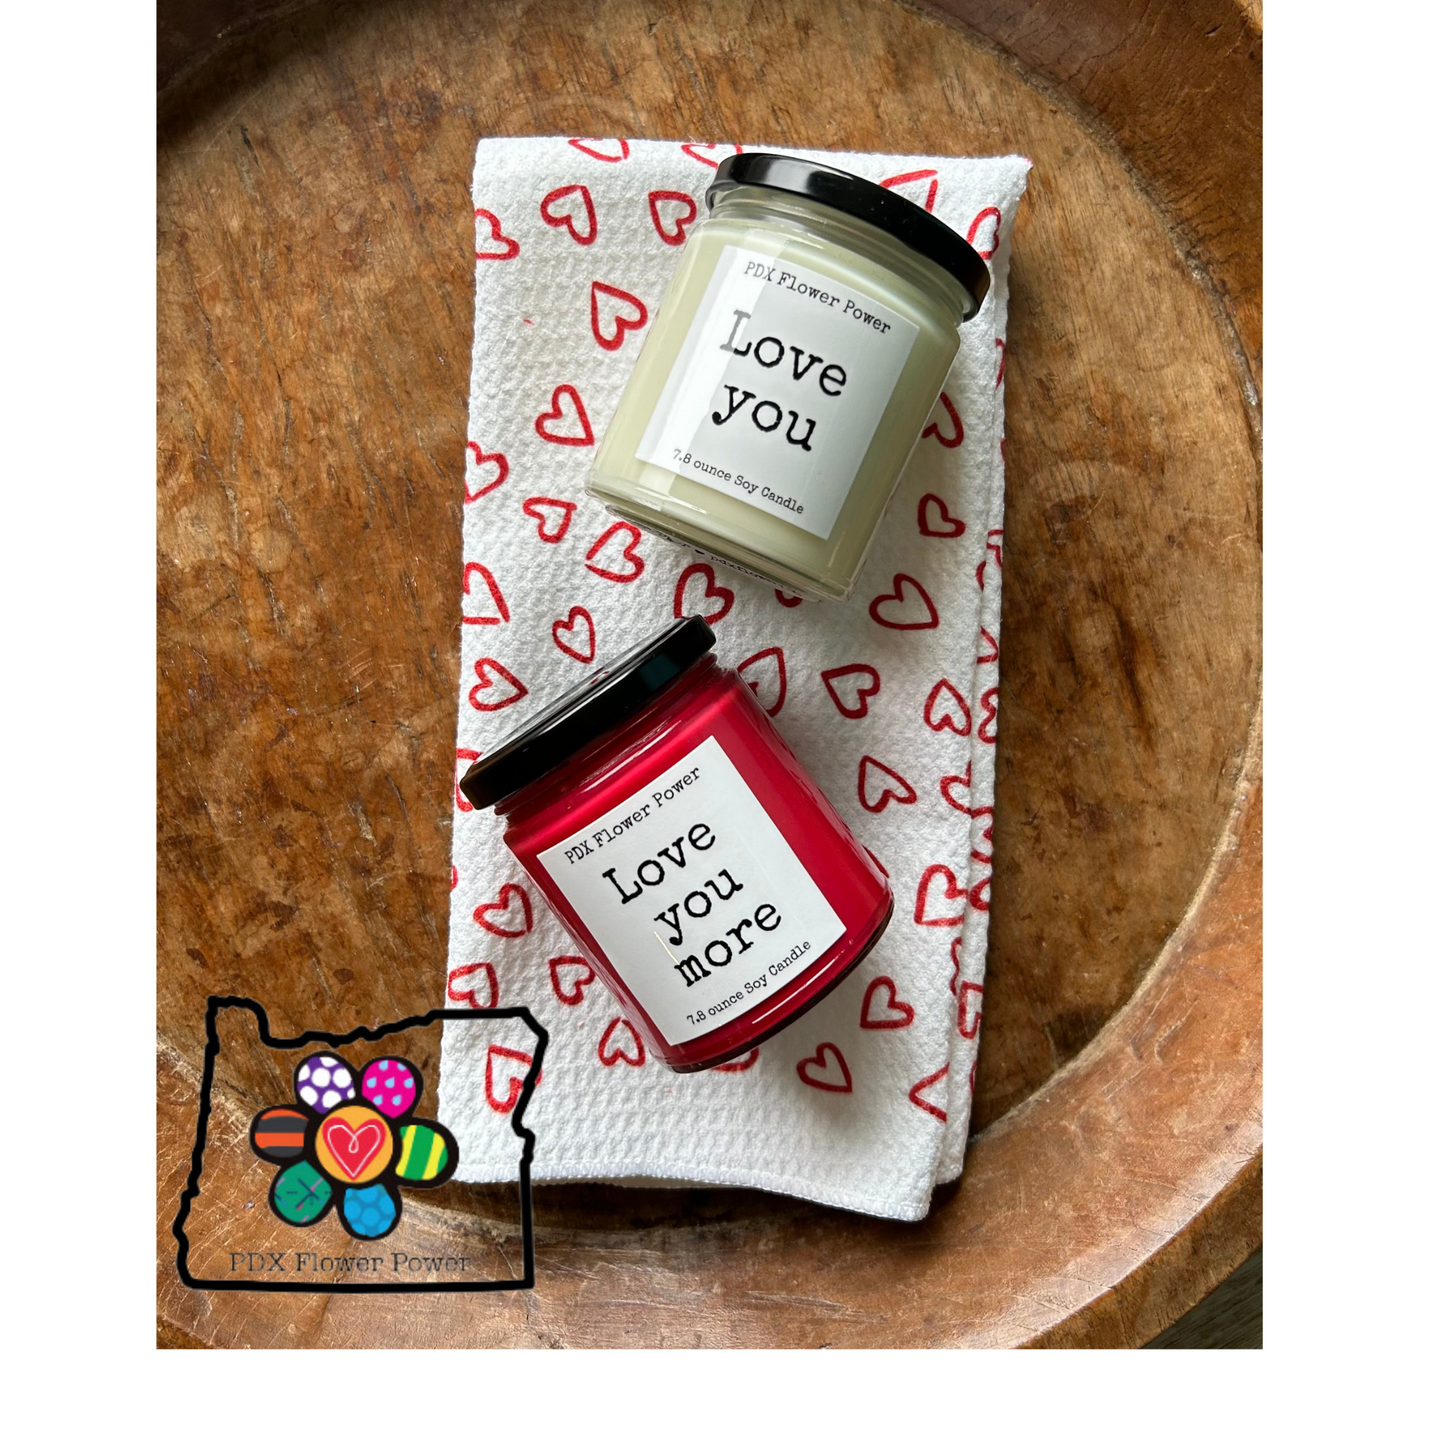 Love You, Love You more candles and towel set,  Happy Valentine's Day gift, heart dish towels